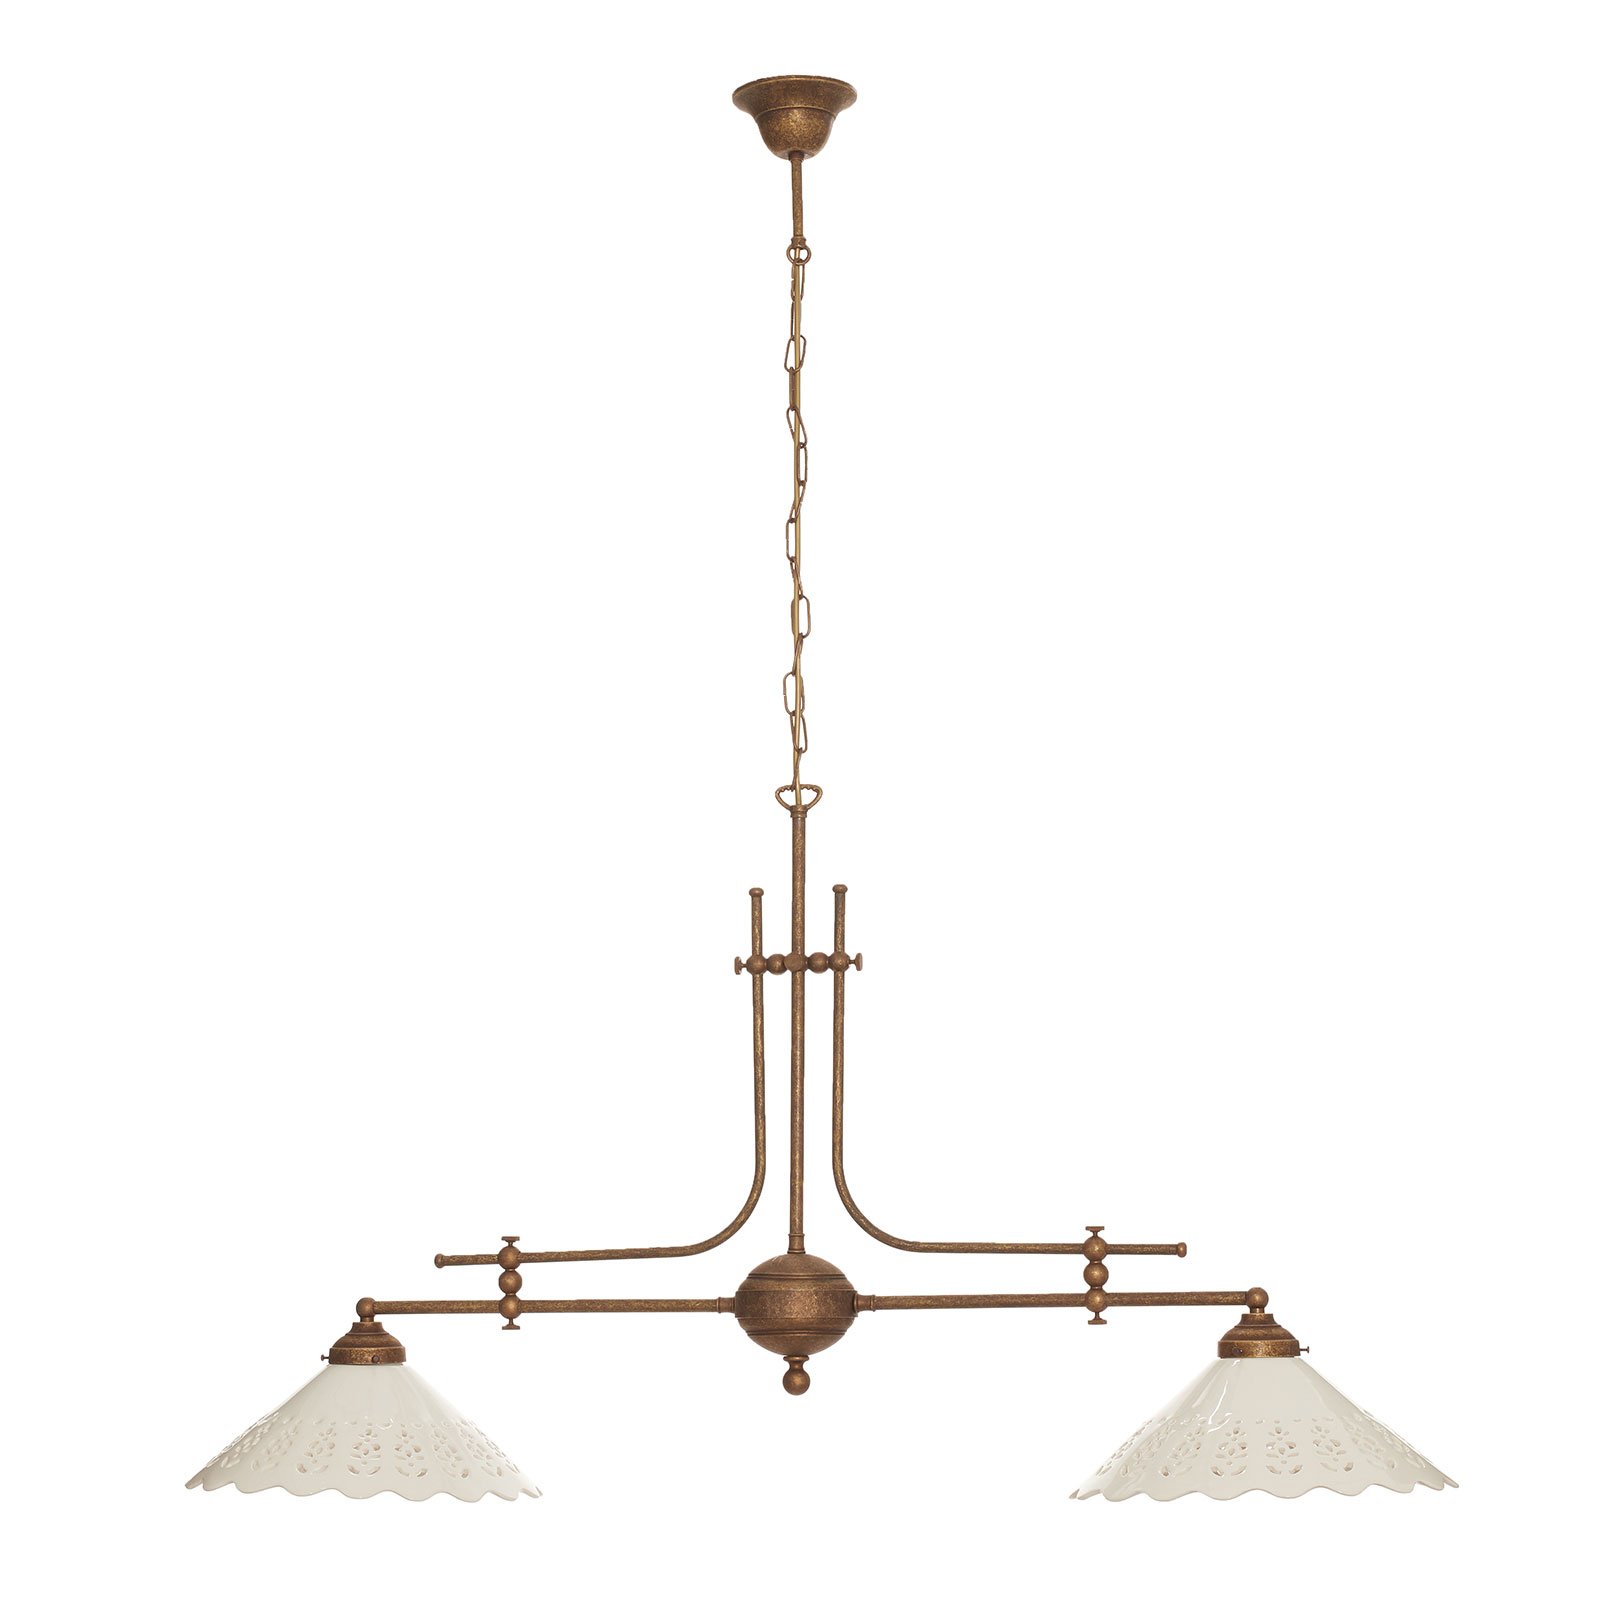 Hanging light Pizzo with chain, two-bulb